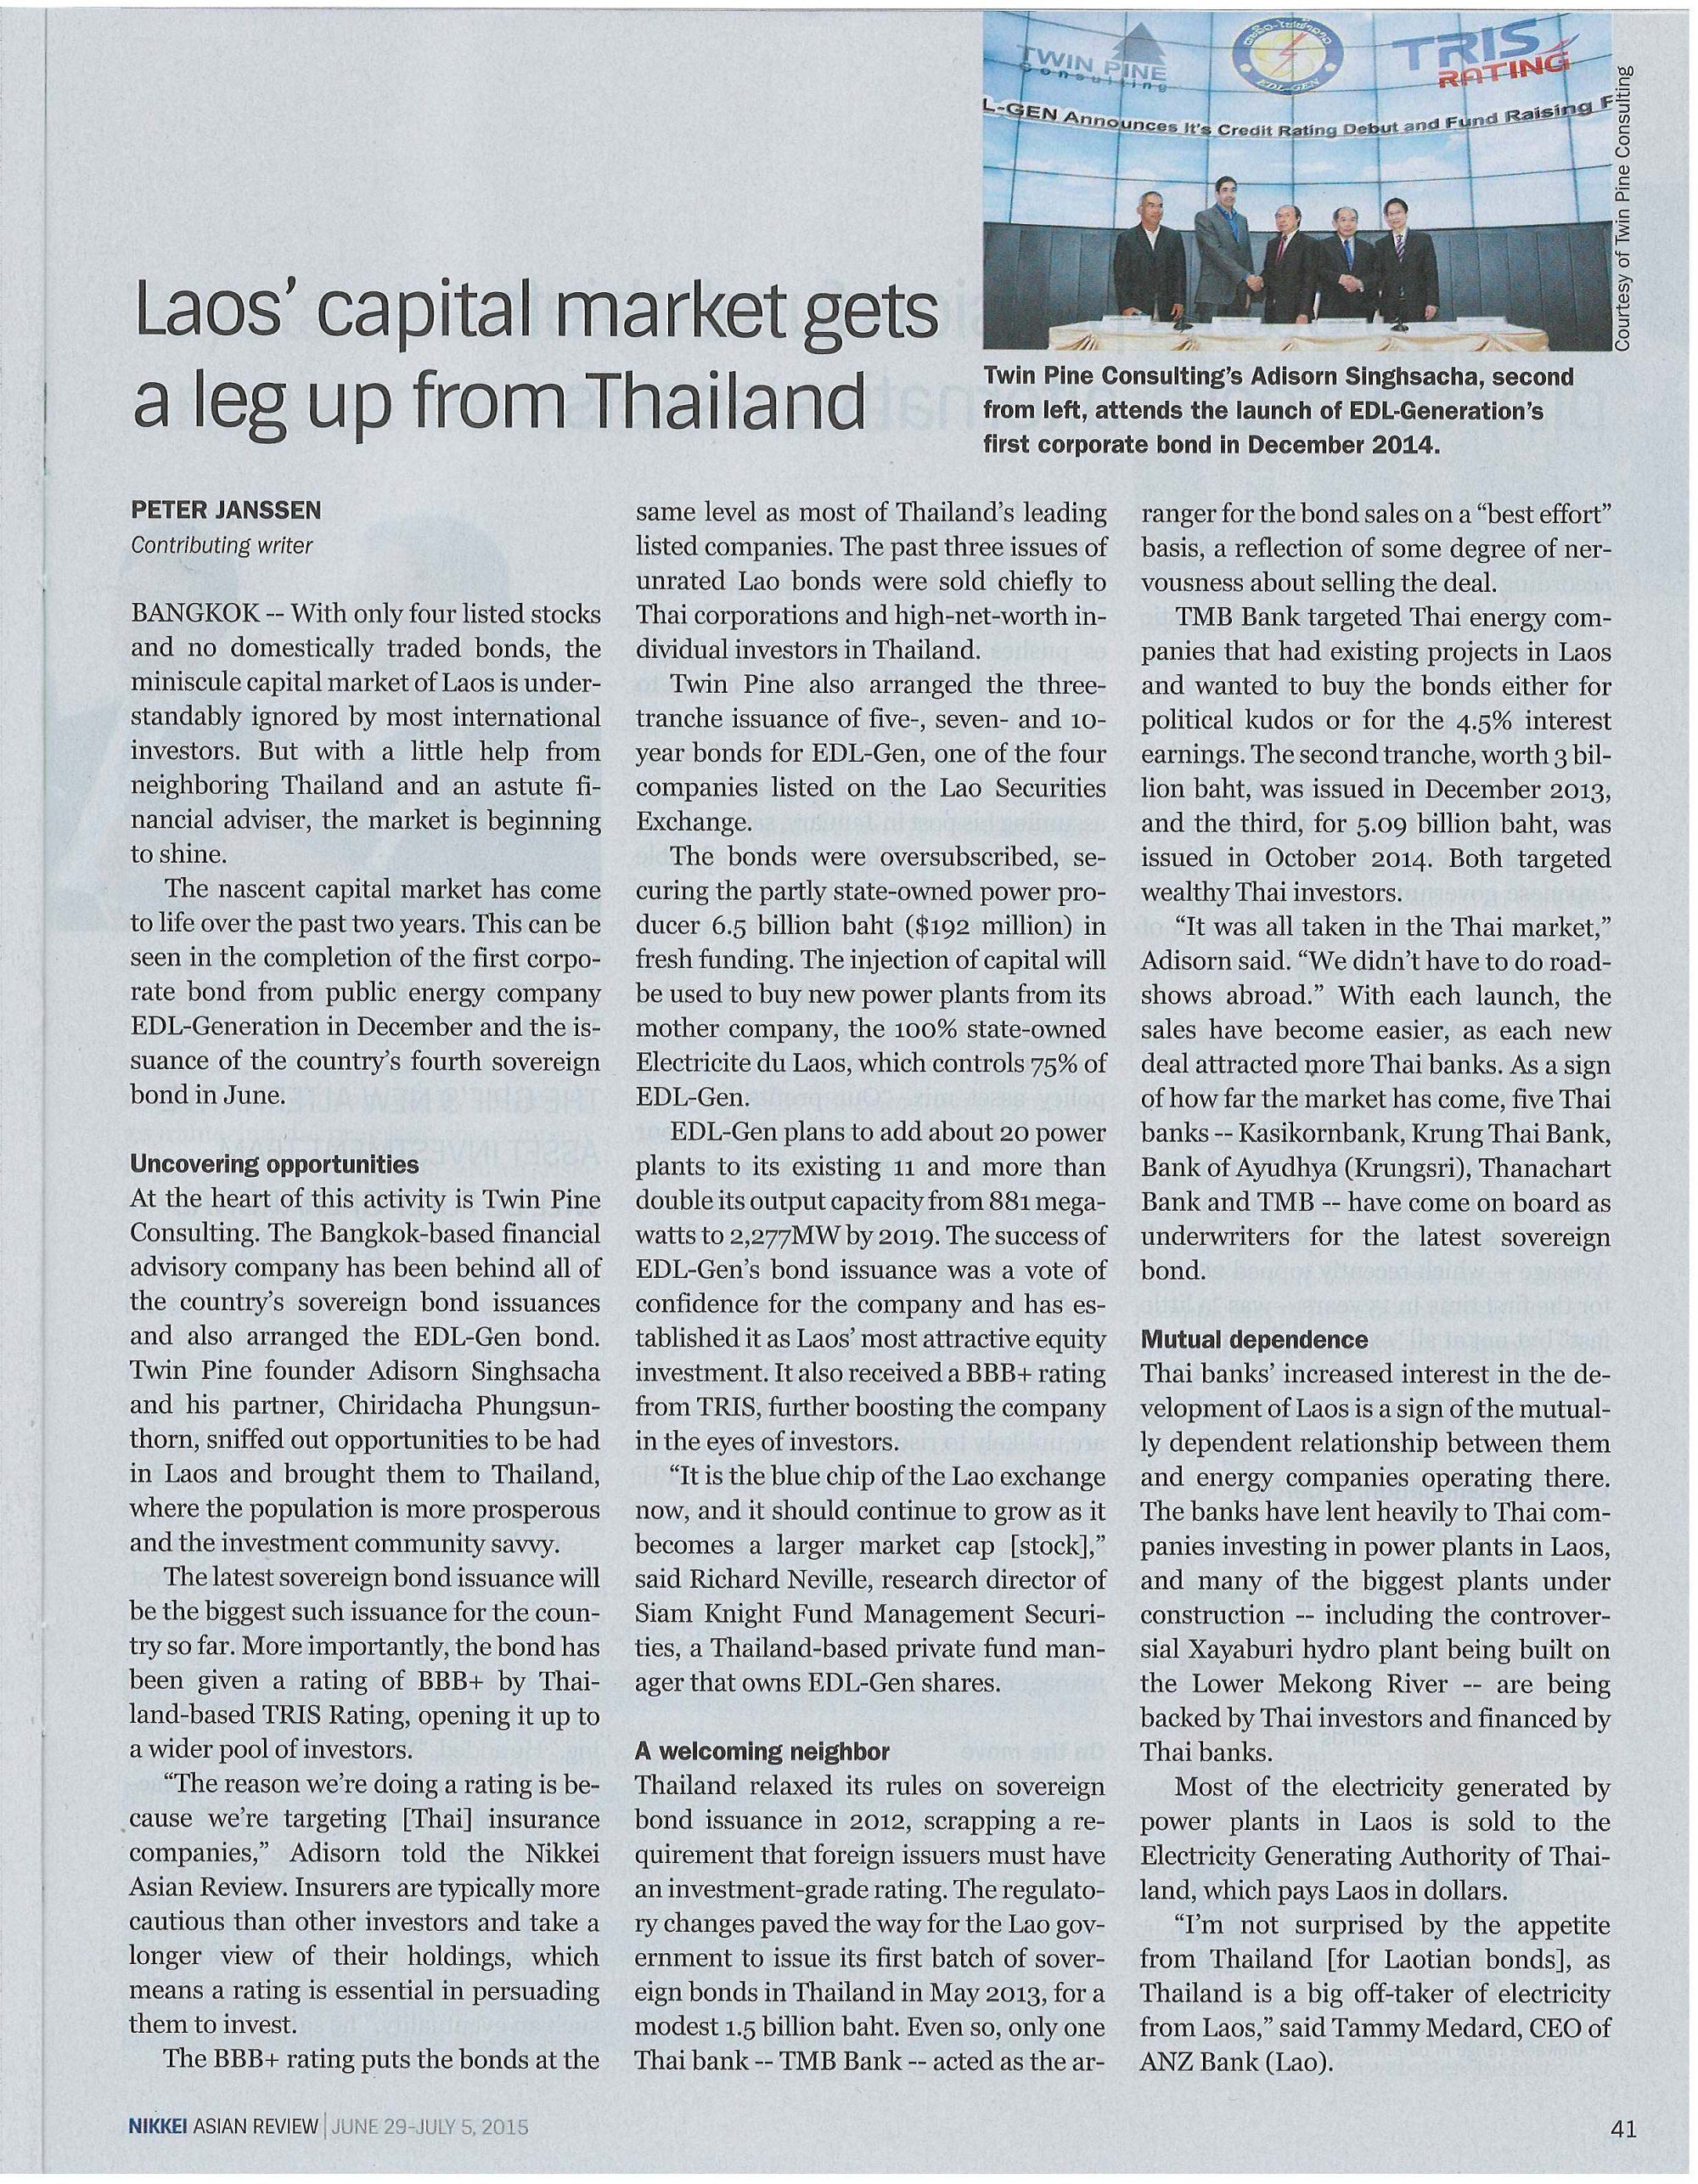 Nikkei Asian Review’s Magazine & Website – Laos’ capital market gets a leg up from Thailand